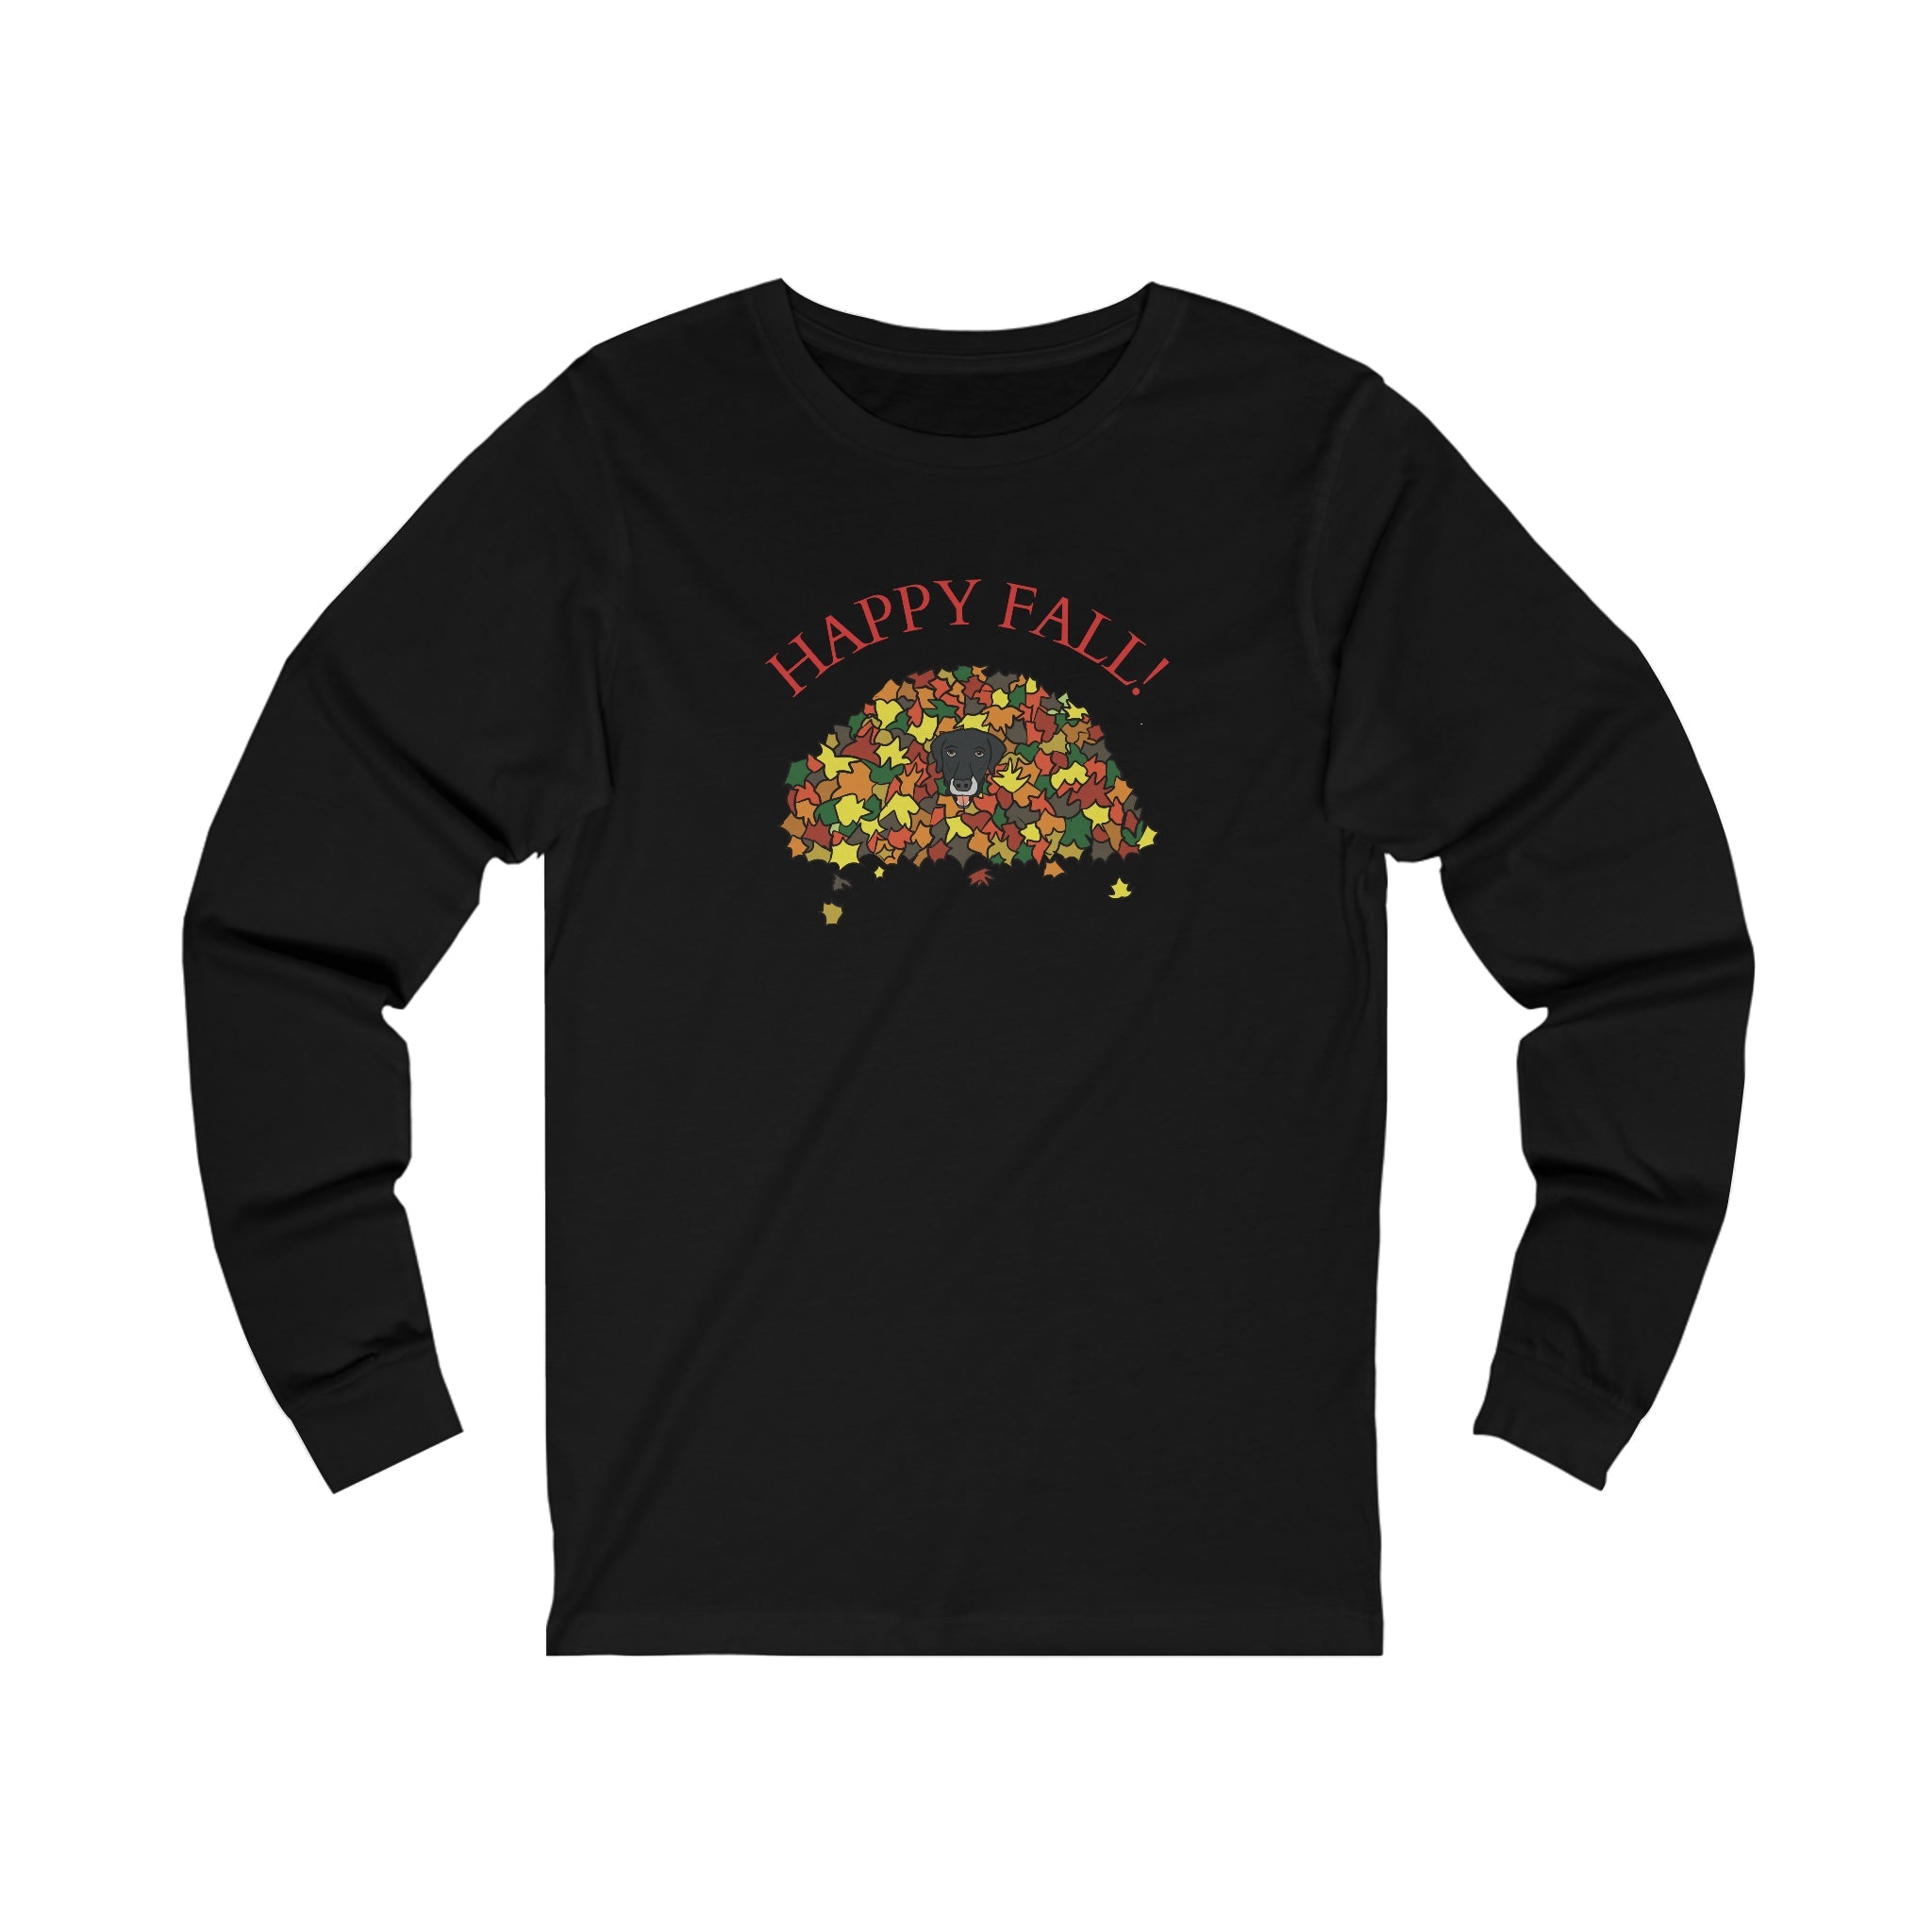 Hiding in the Leaf Pile Long Sleeve Tee - TAILWAGS UNLIMITED